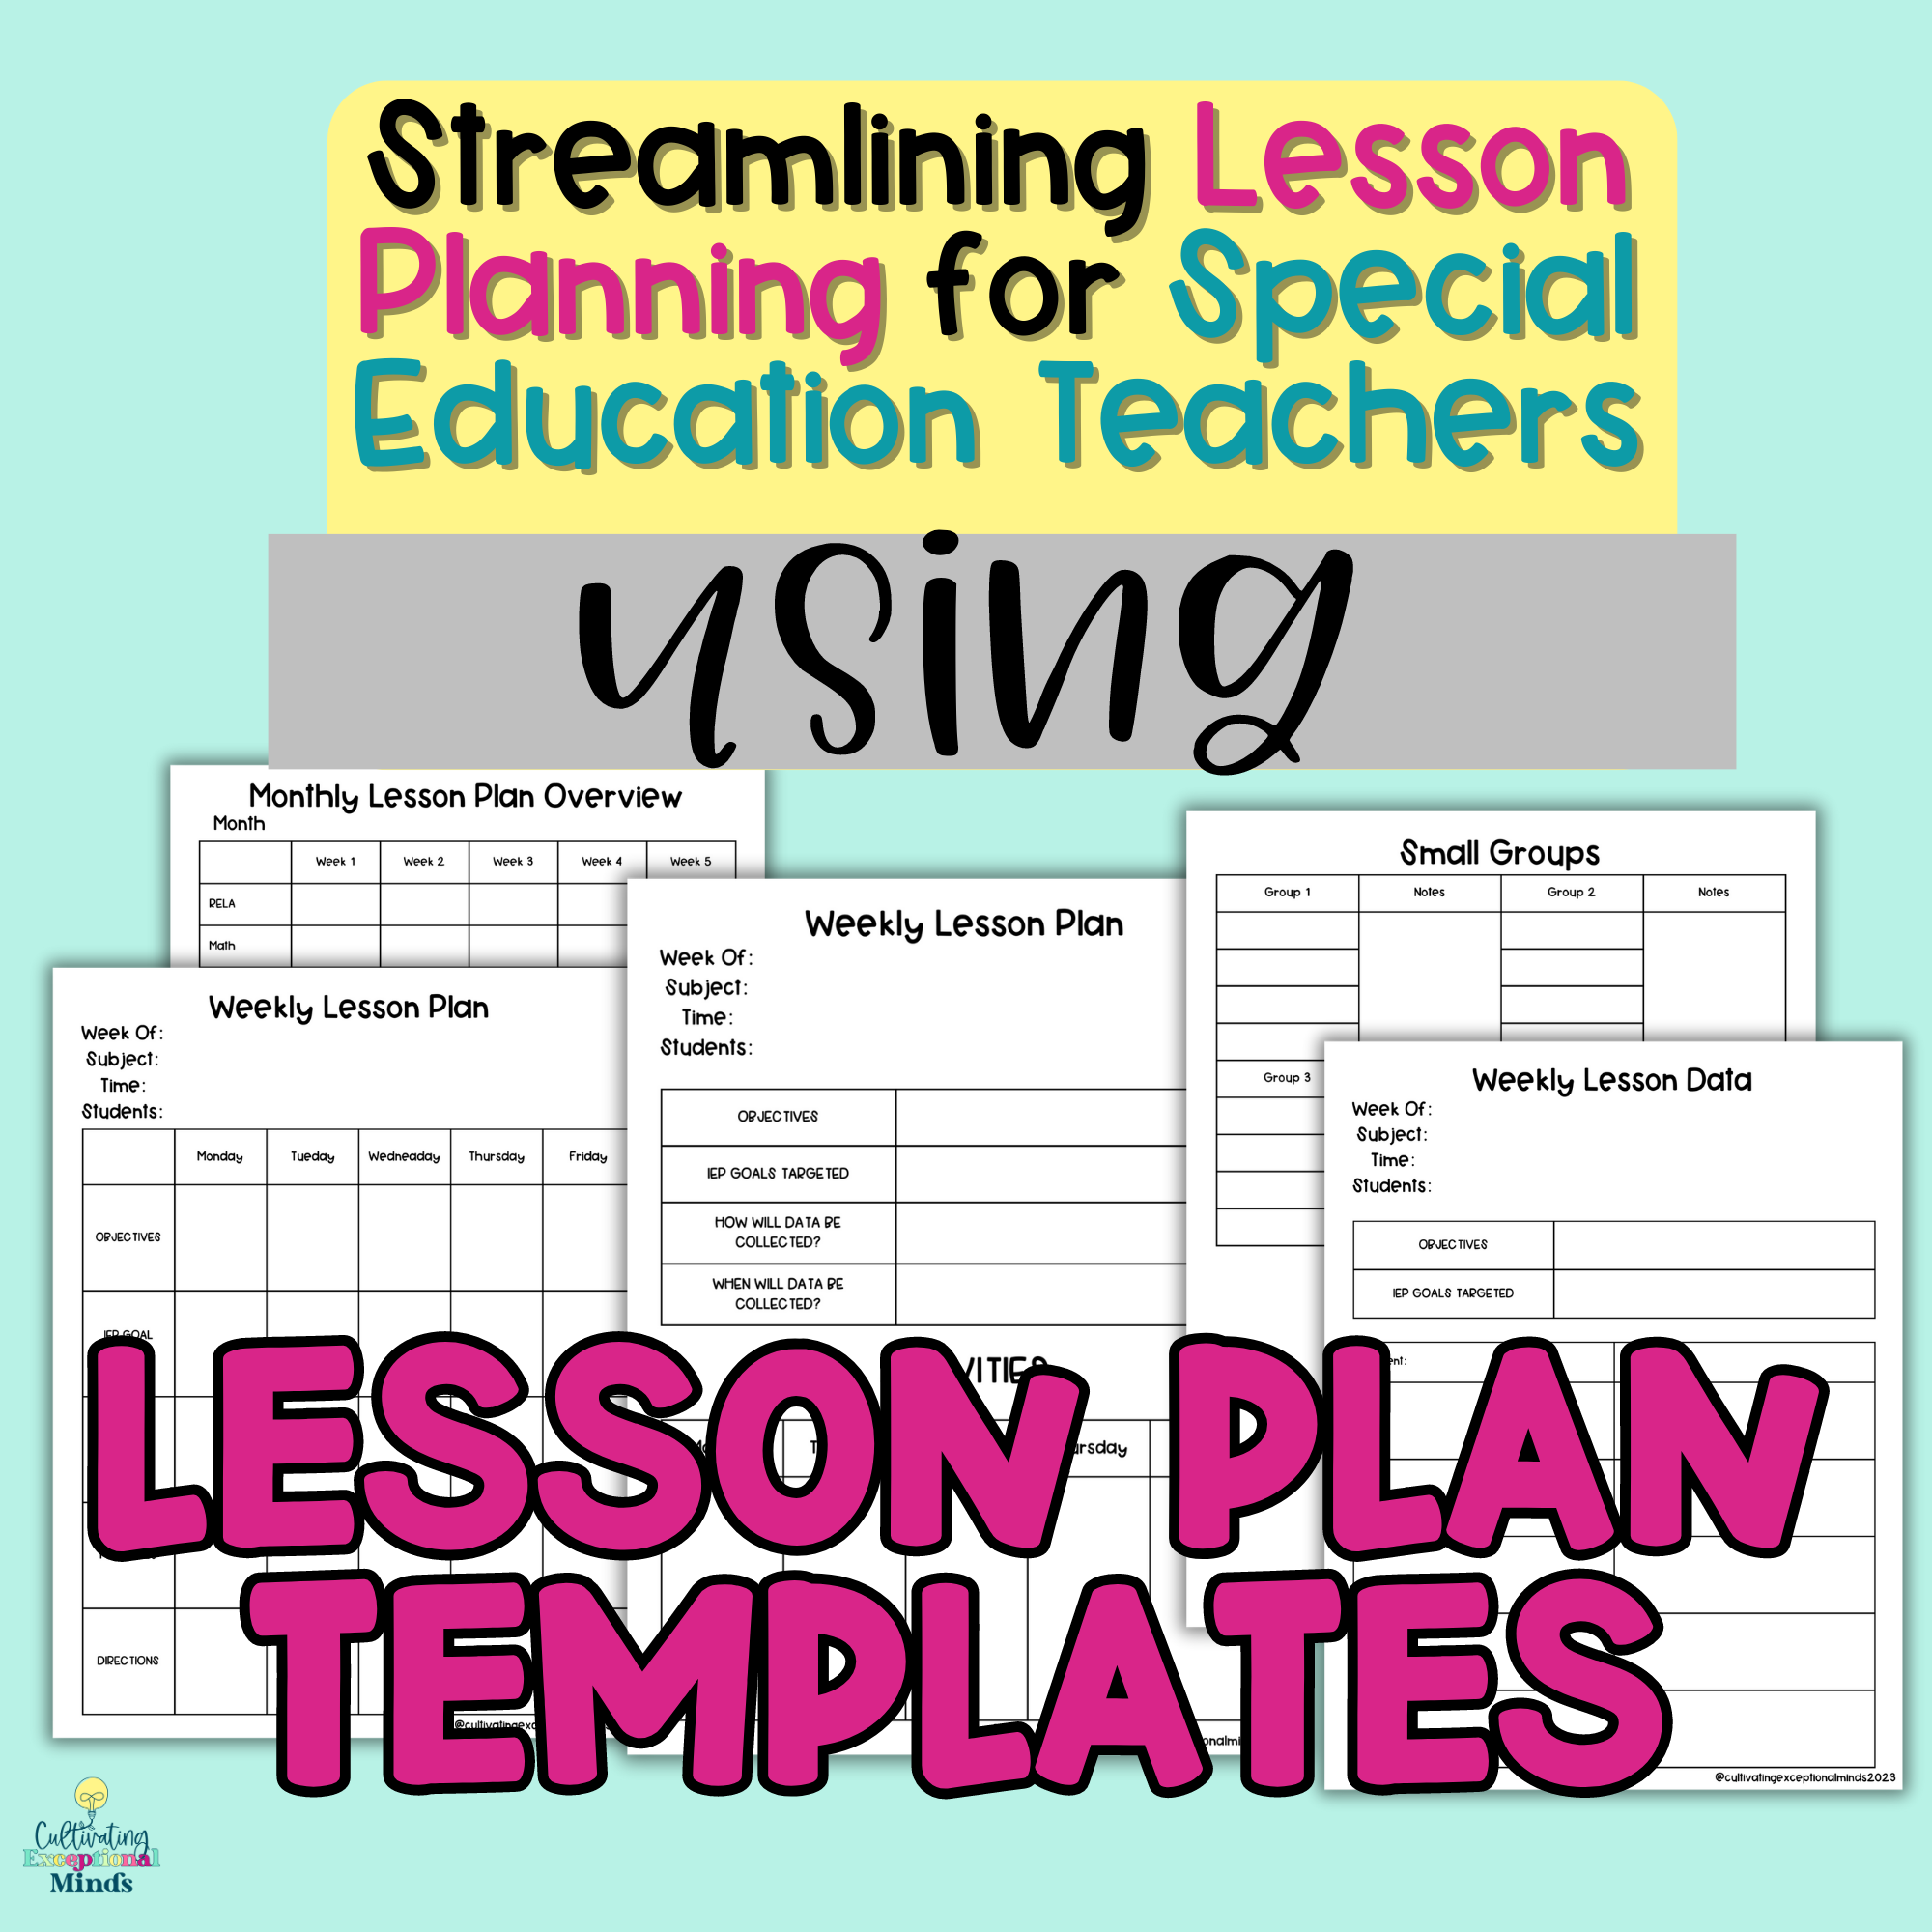 Special Education Lesson Plan Template | Special Education Lesson Plans Editable